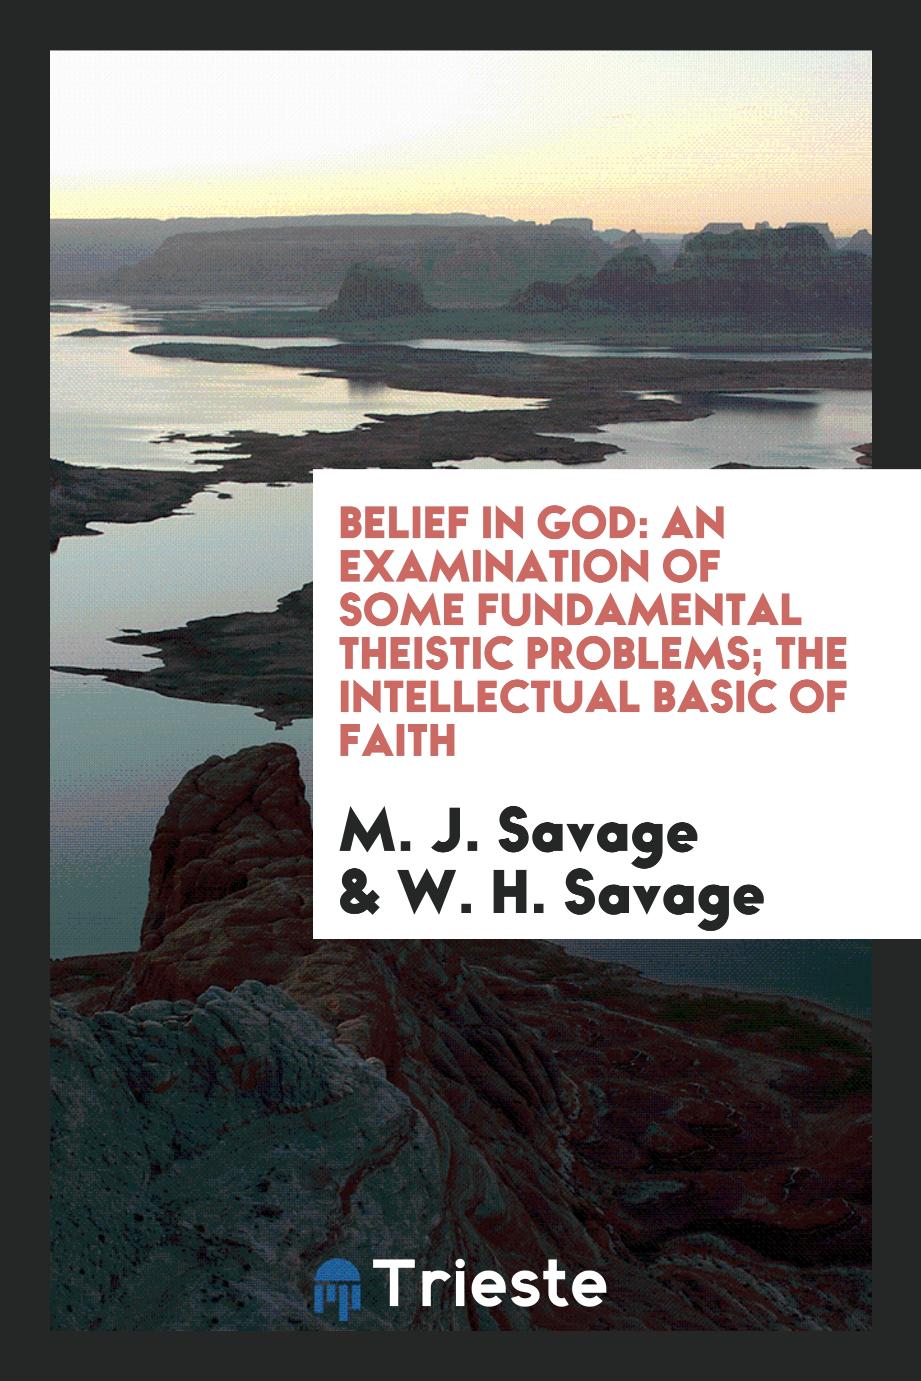 Belief in God: An Examination of Some Fundamental Theistic Problems; The Intellectual Basic of Faith